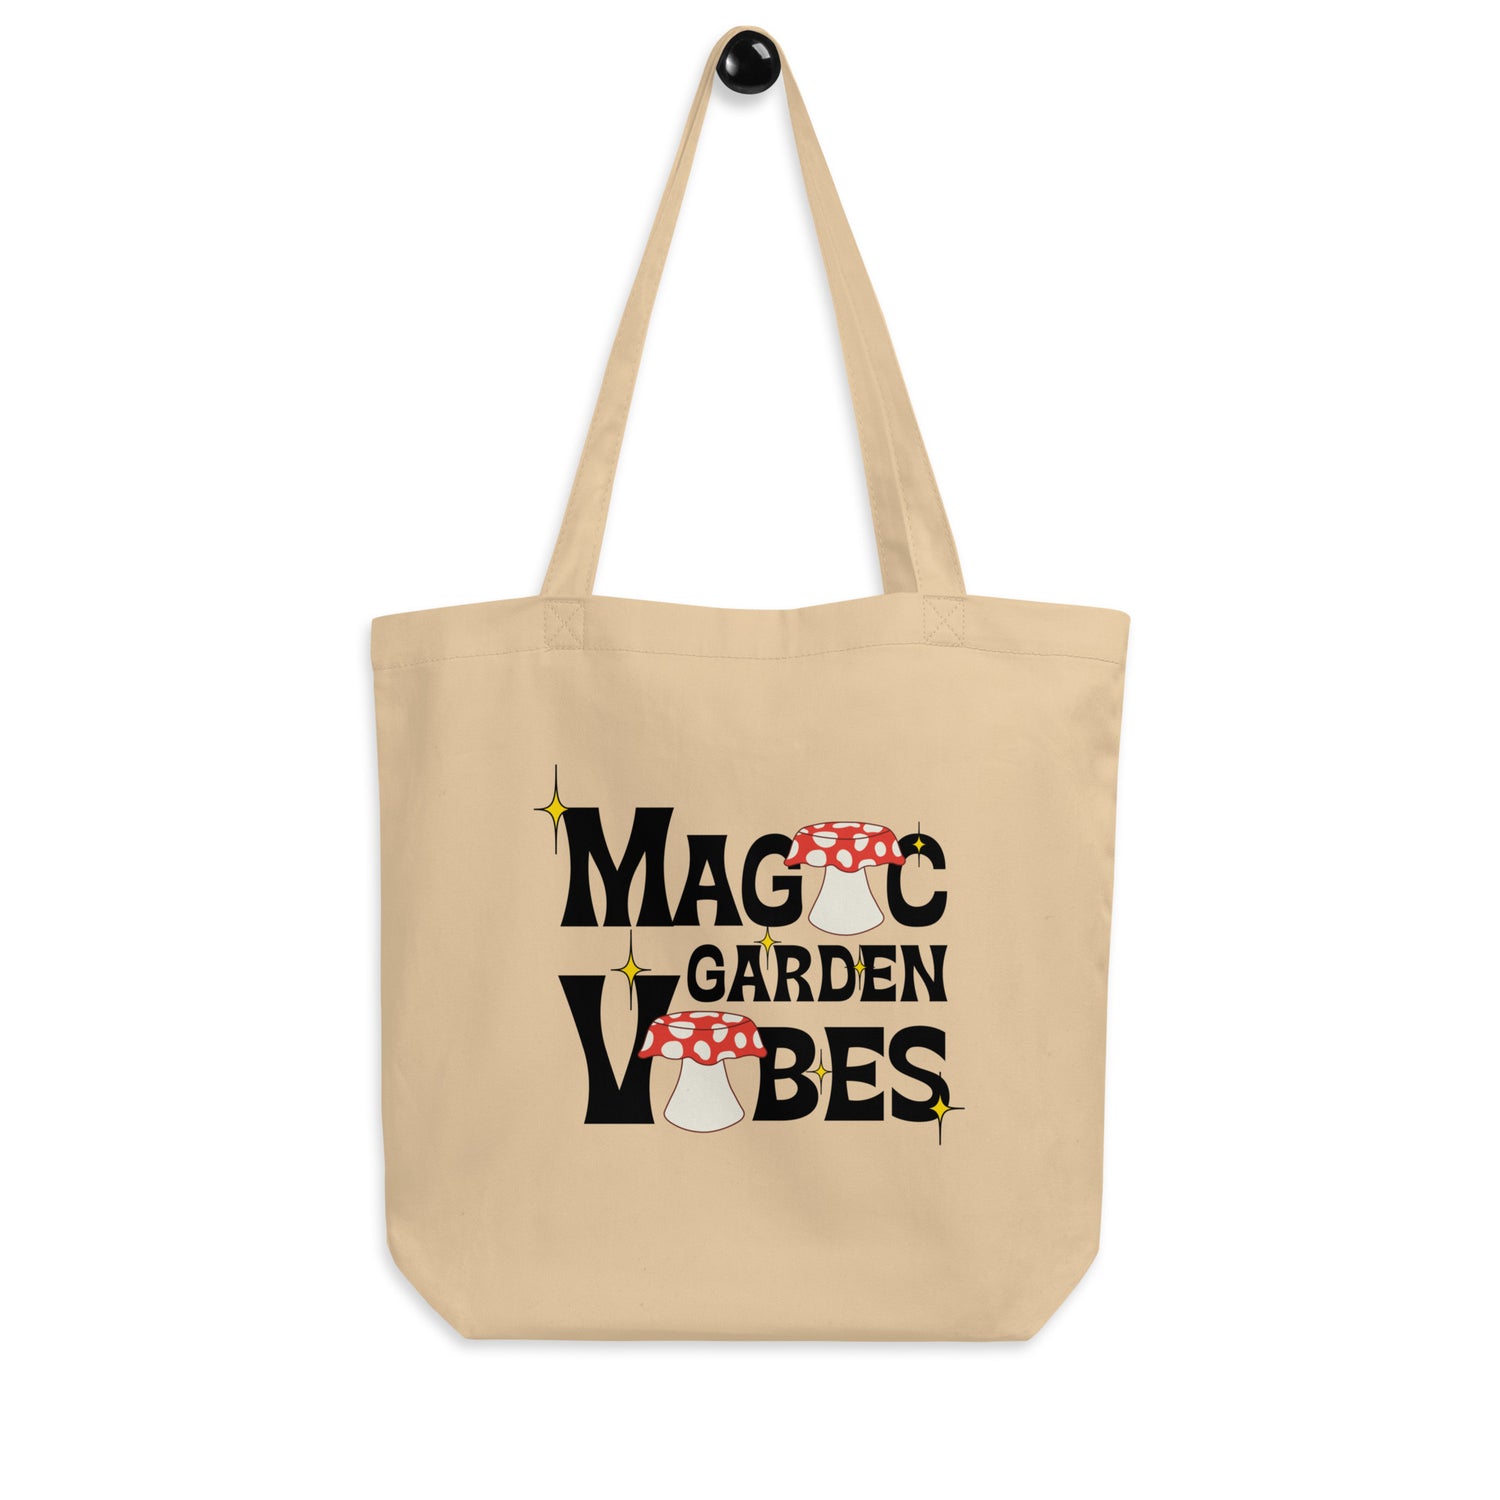 MG Vibes Tote